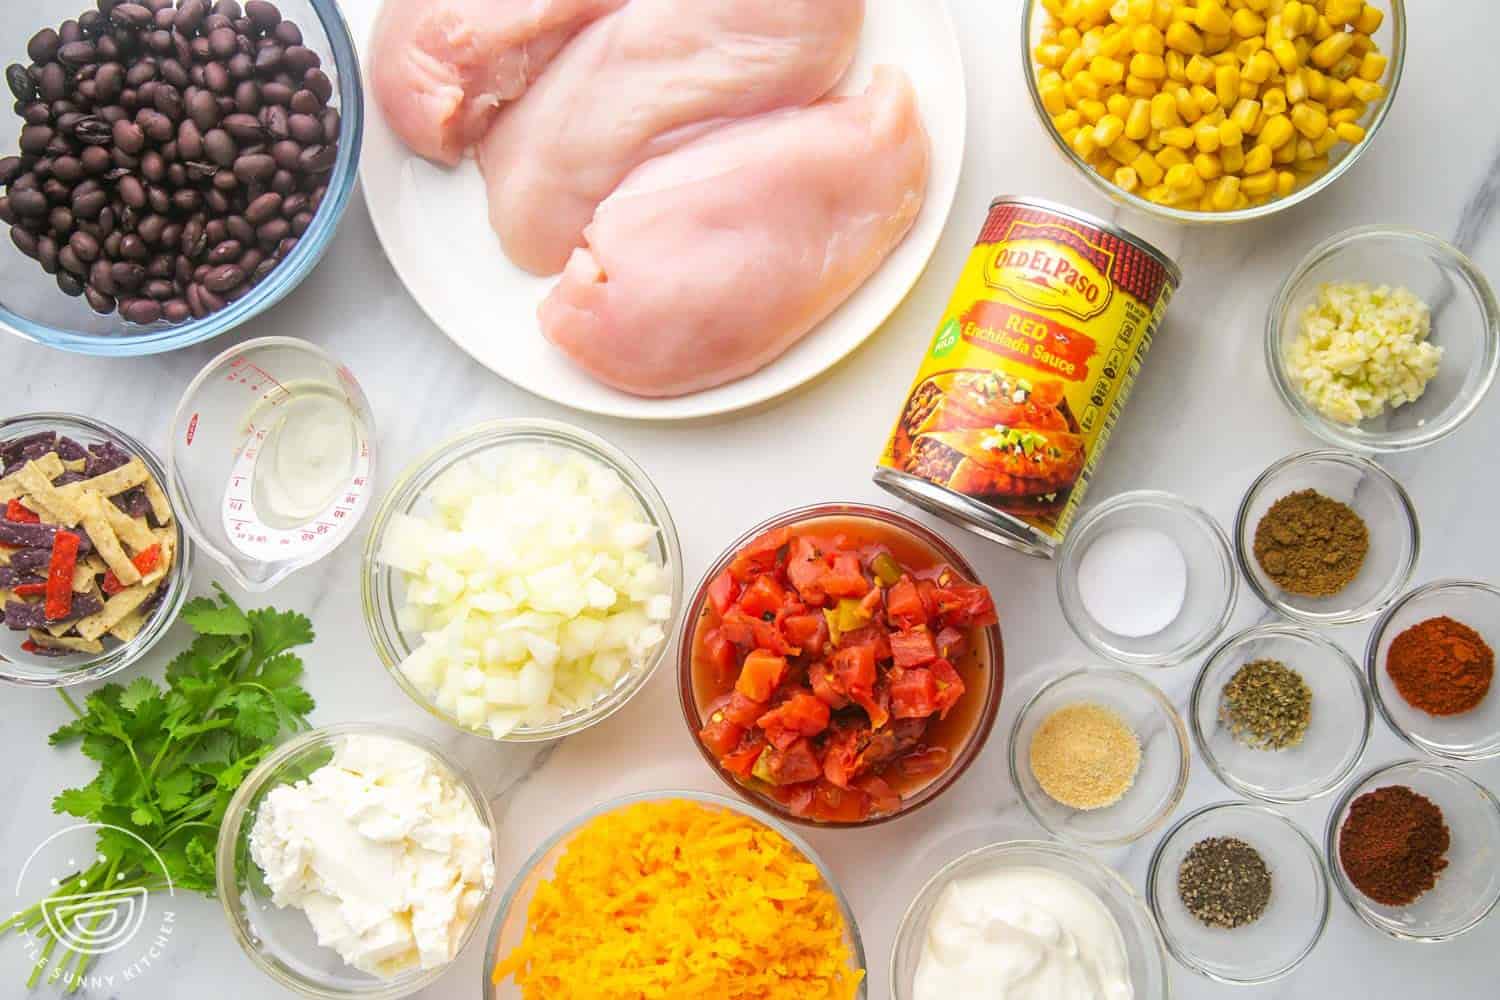 the ingredients needed to make chicken enchilada soup including rotel, beans, chicken, cheese, and corn.